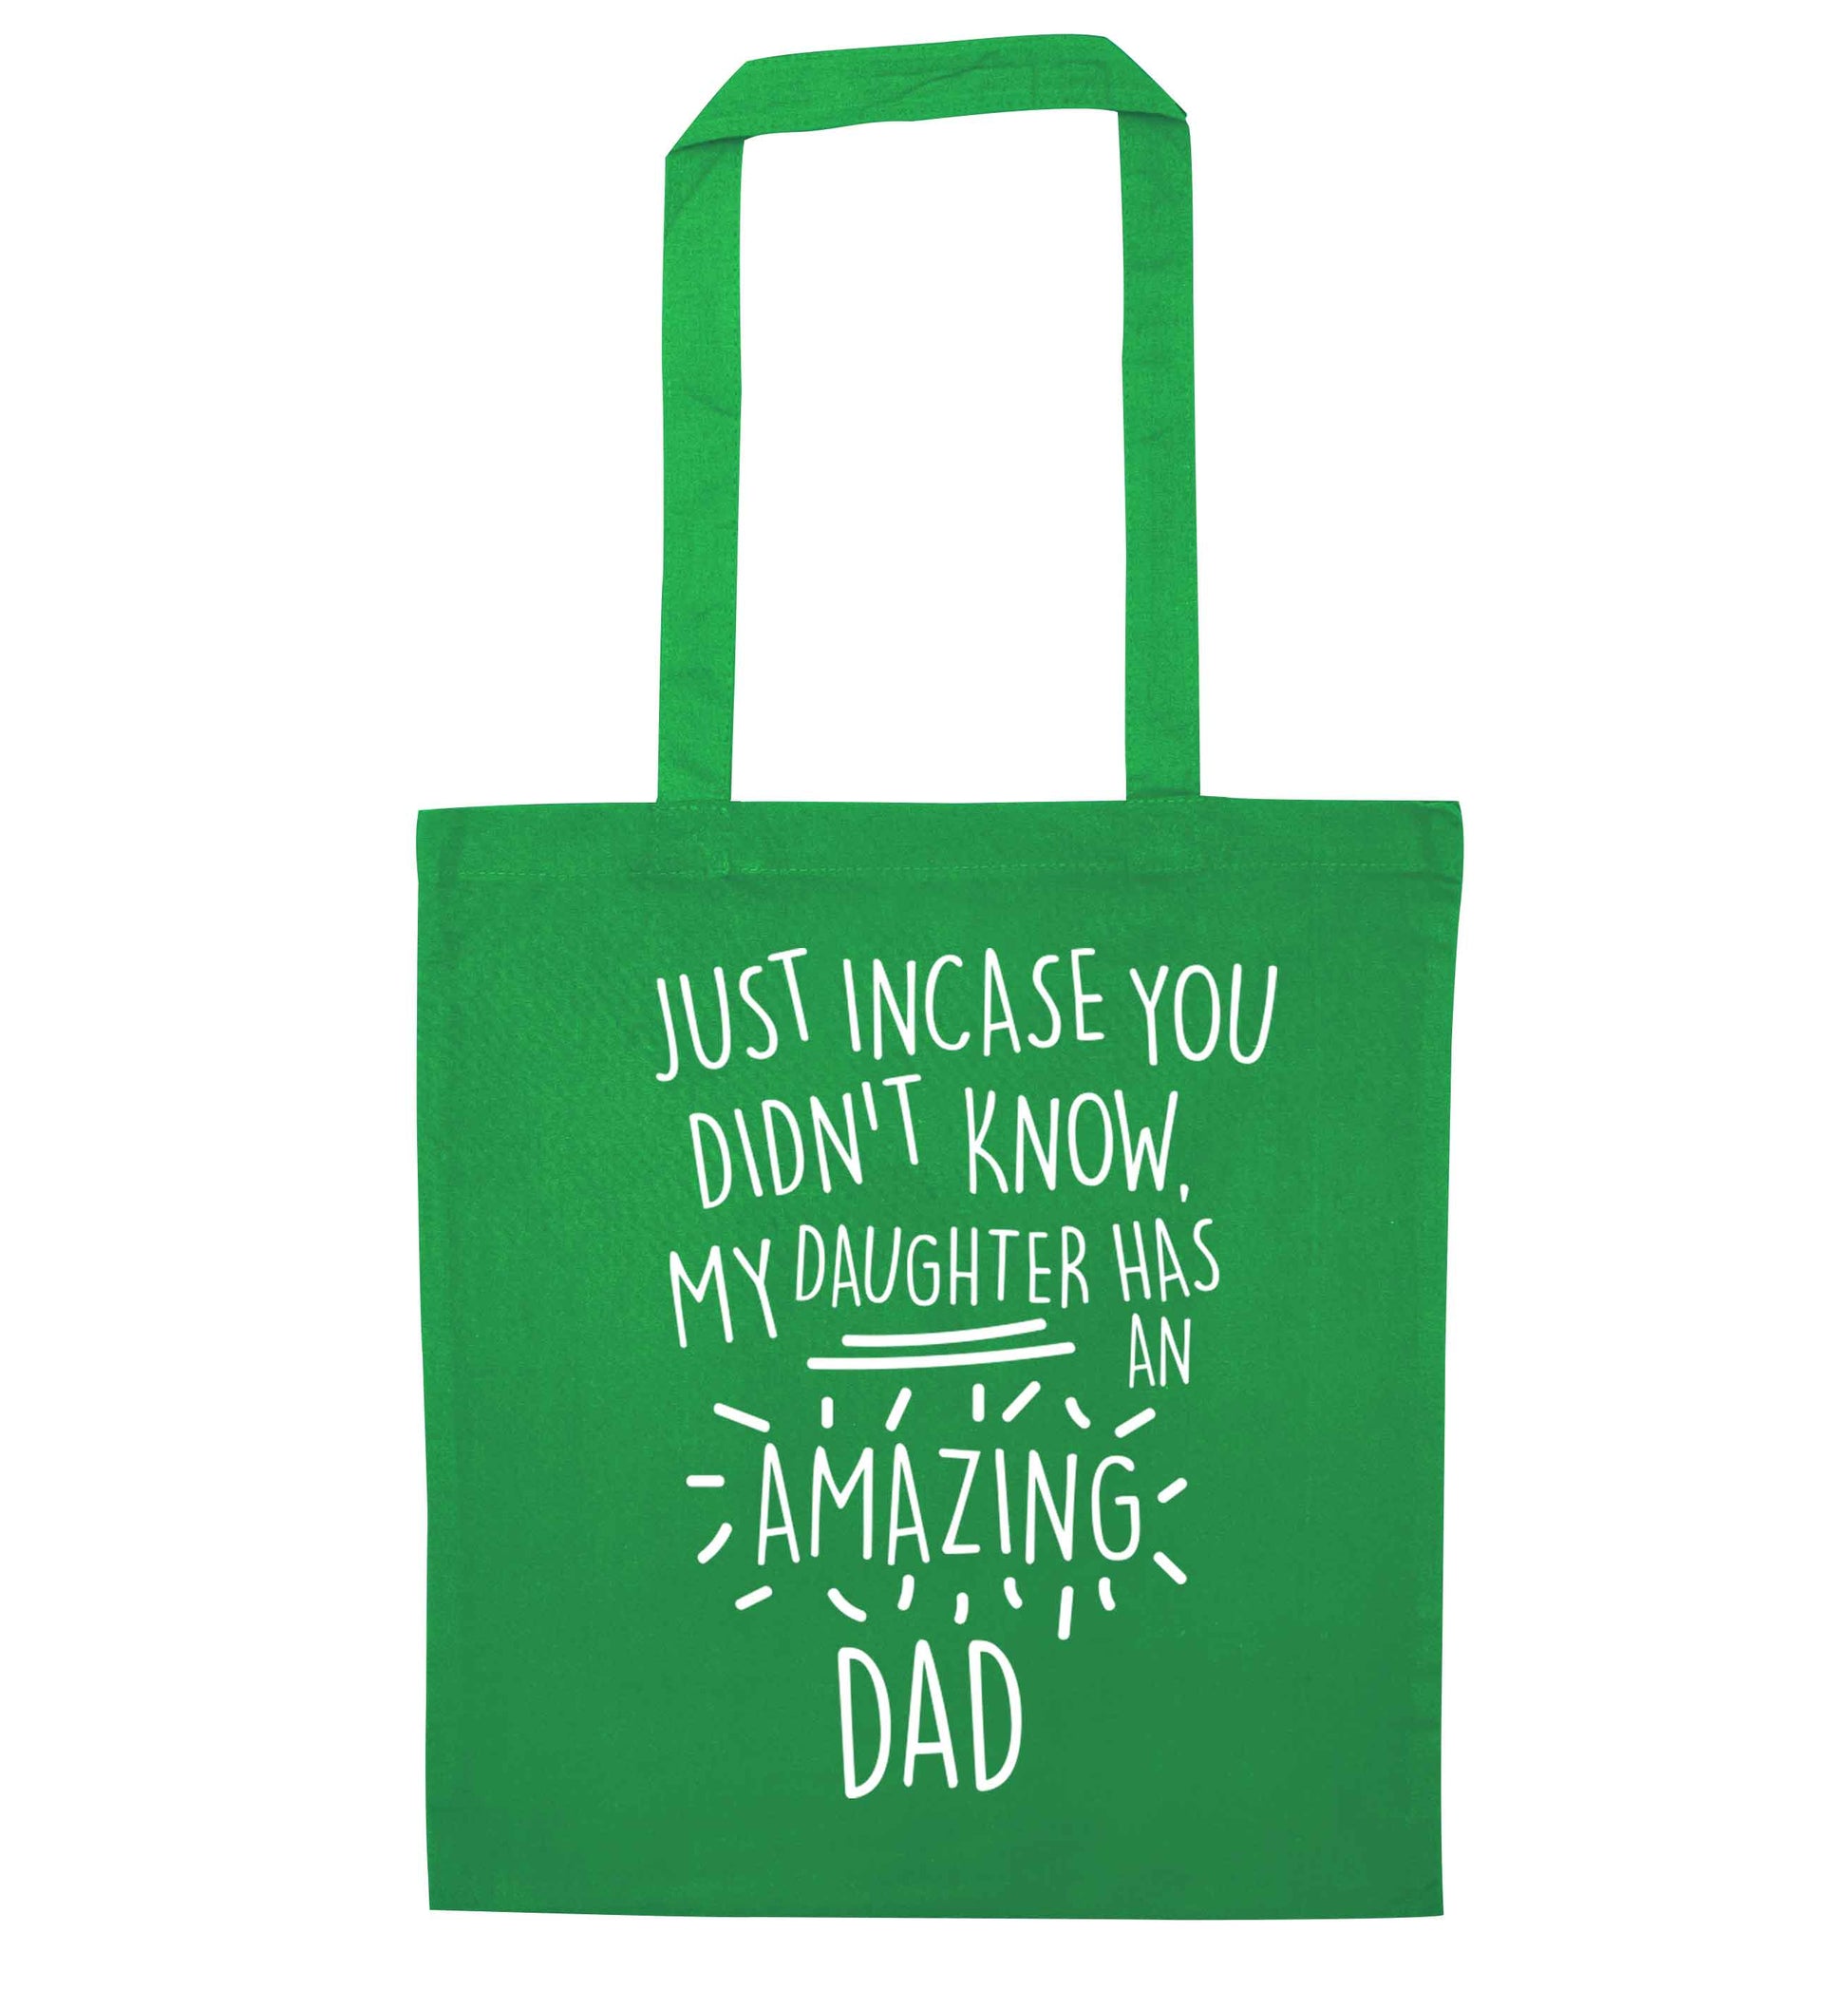 Just incase you didn't know my daughter has an amazing dad green tote bag